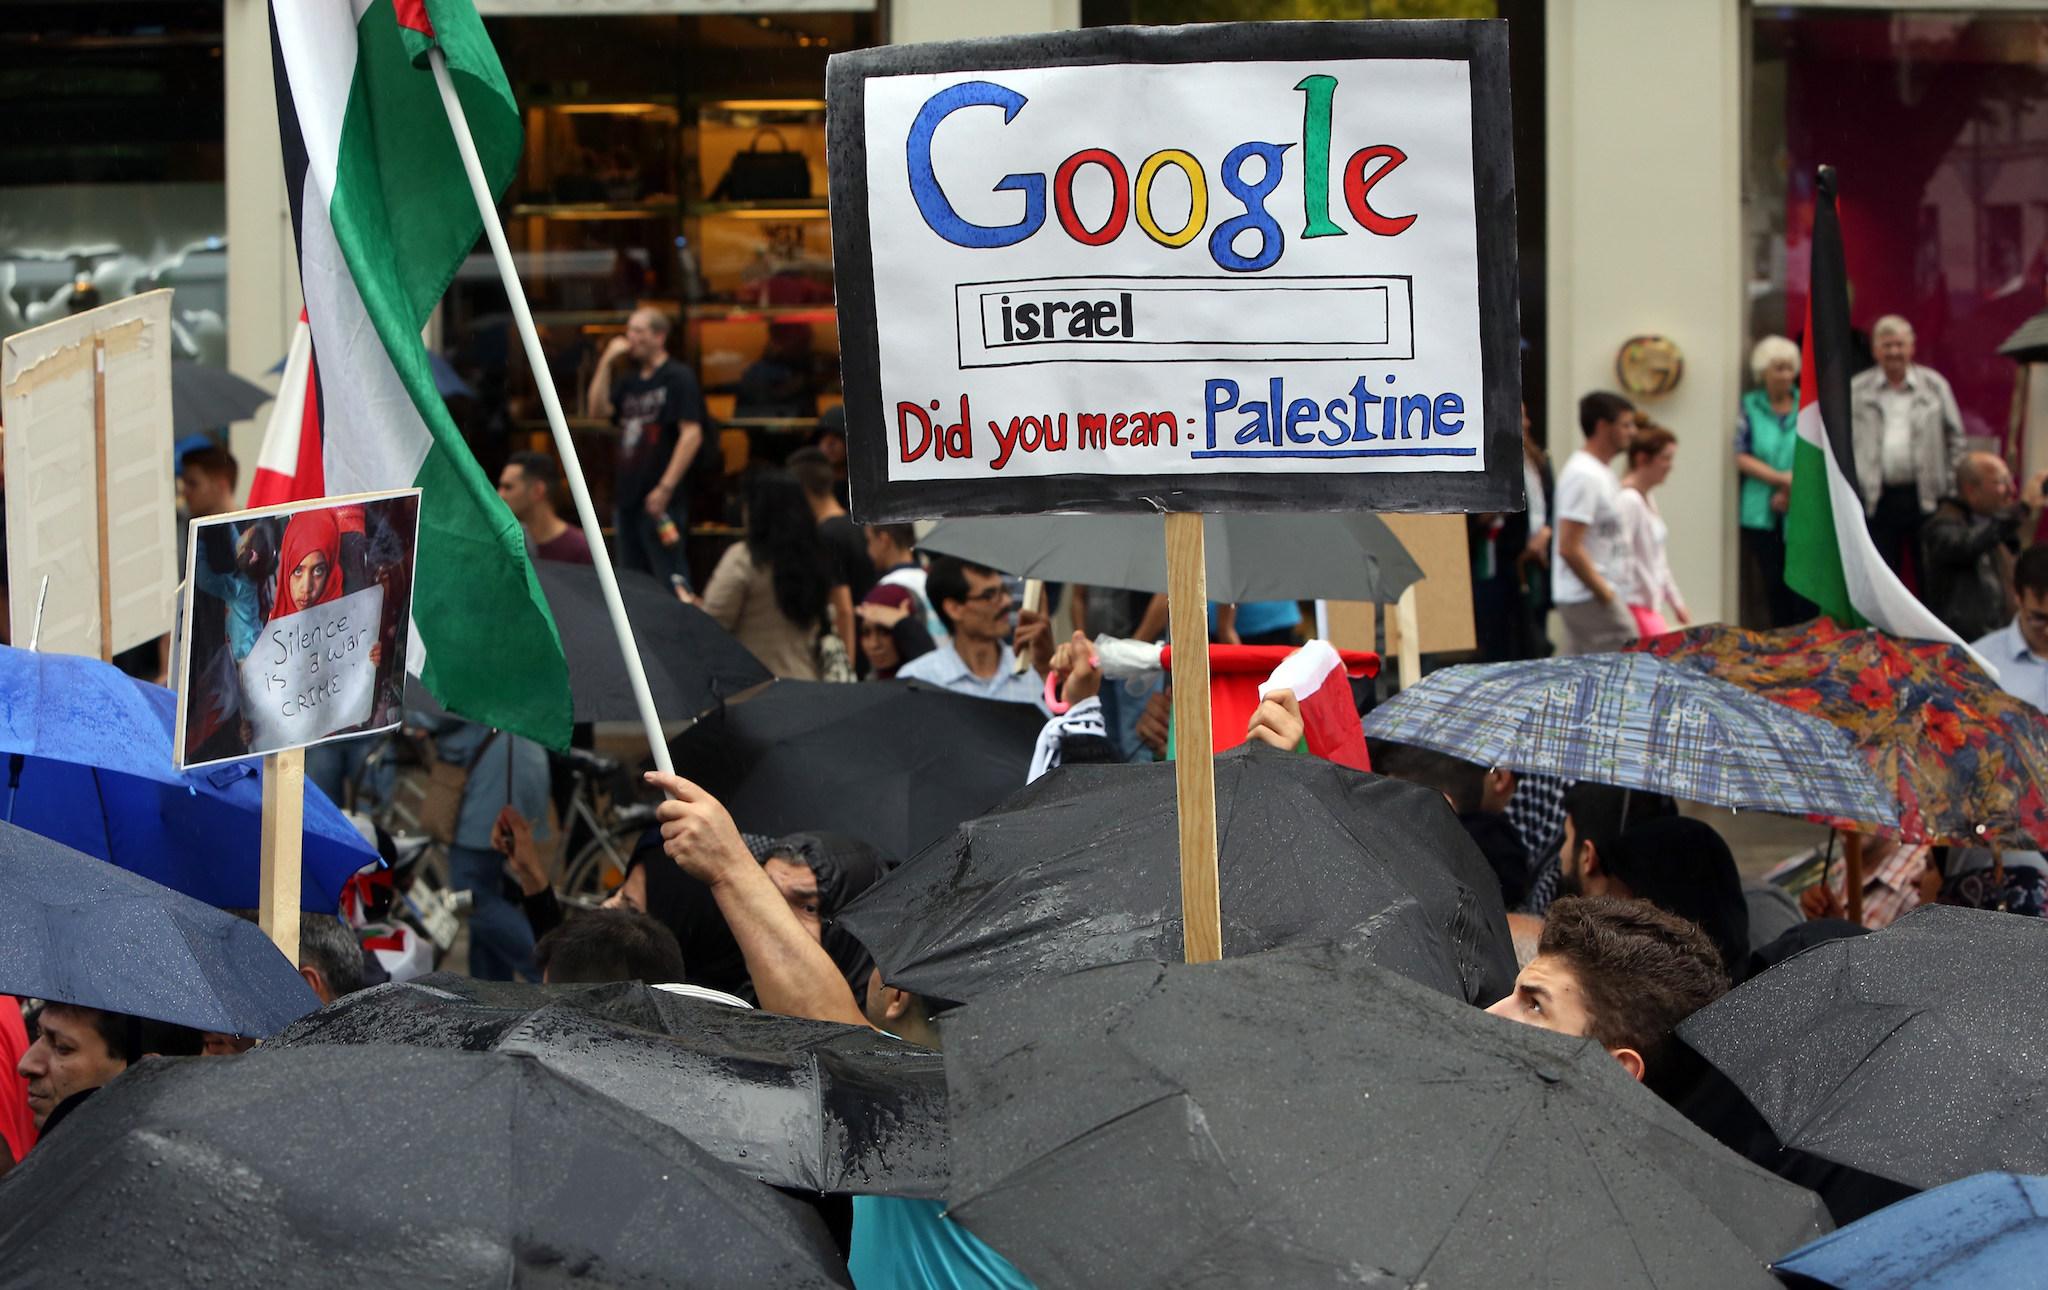 Demonstrators hold a placard reading 'Google Israel - did you mean Palestine' during a rally for Al-Quds Day, an event intended to express solidarity with the Palestinian people, on July 25, 2014 in Berlin, Germany